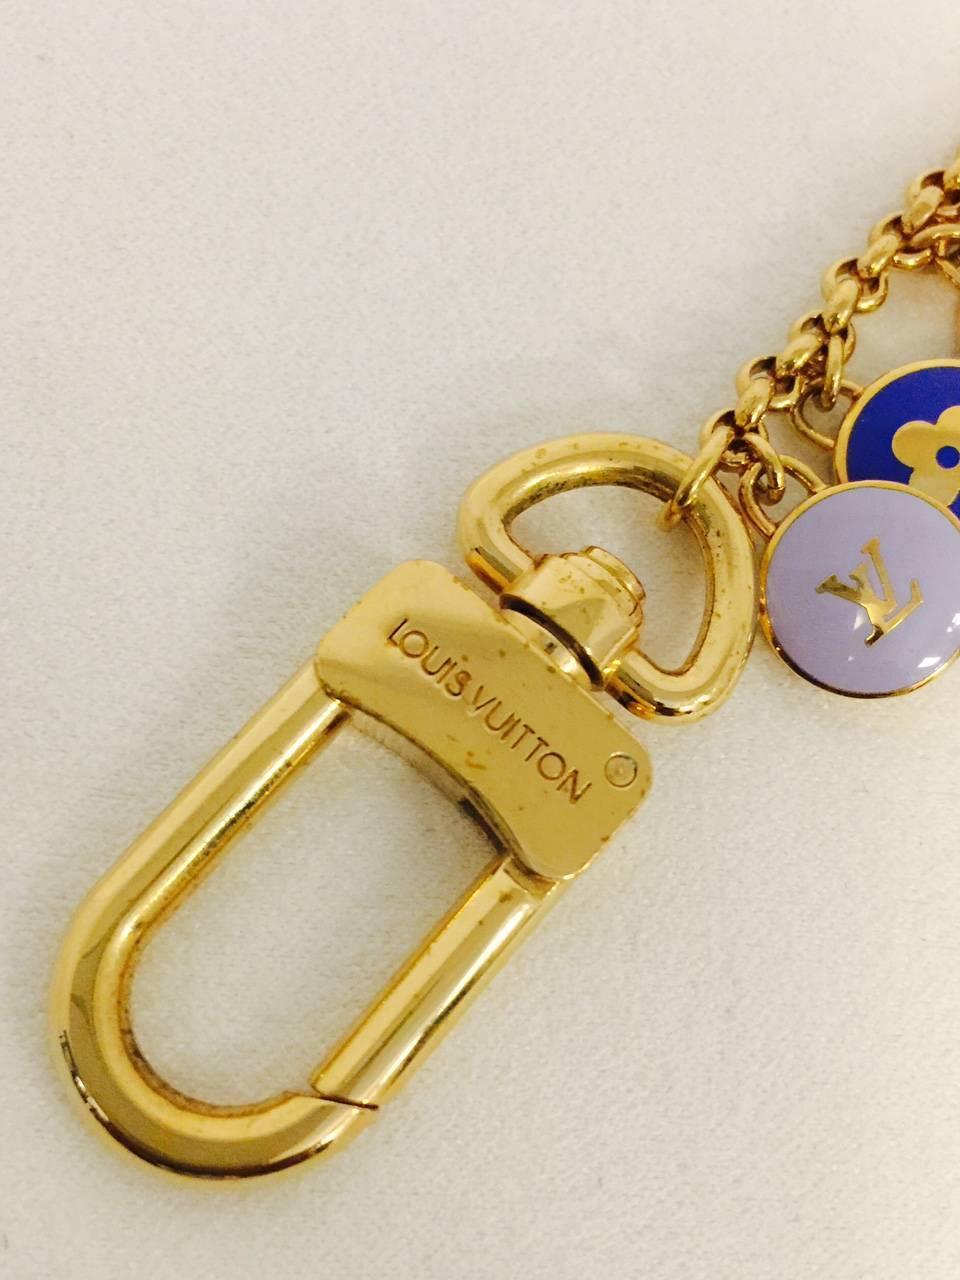 Louis Vuitton Pastilles Key Chain Above Excellent Condition For Sale at 1stdibs